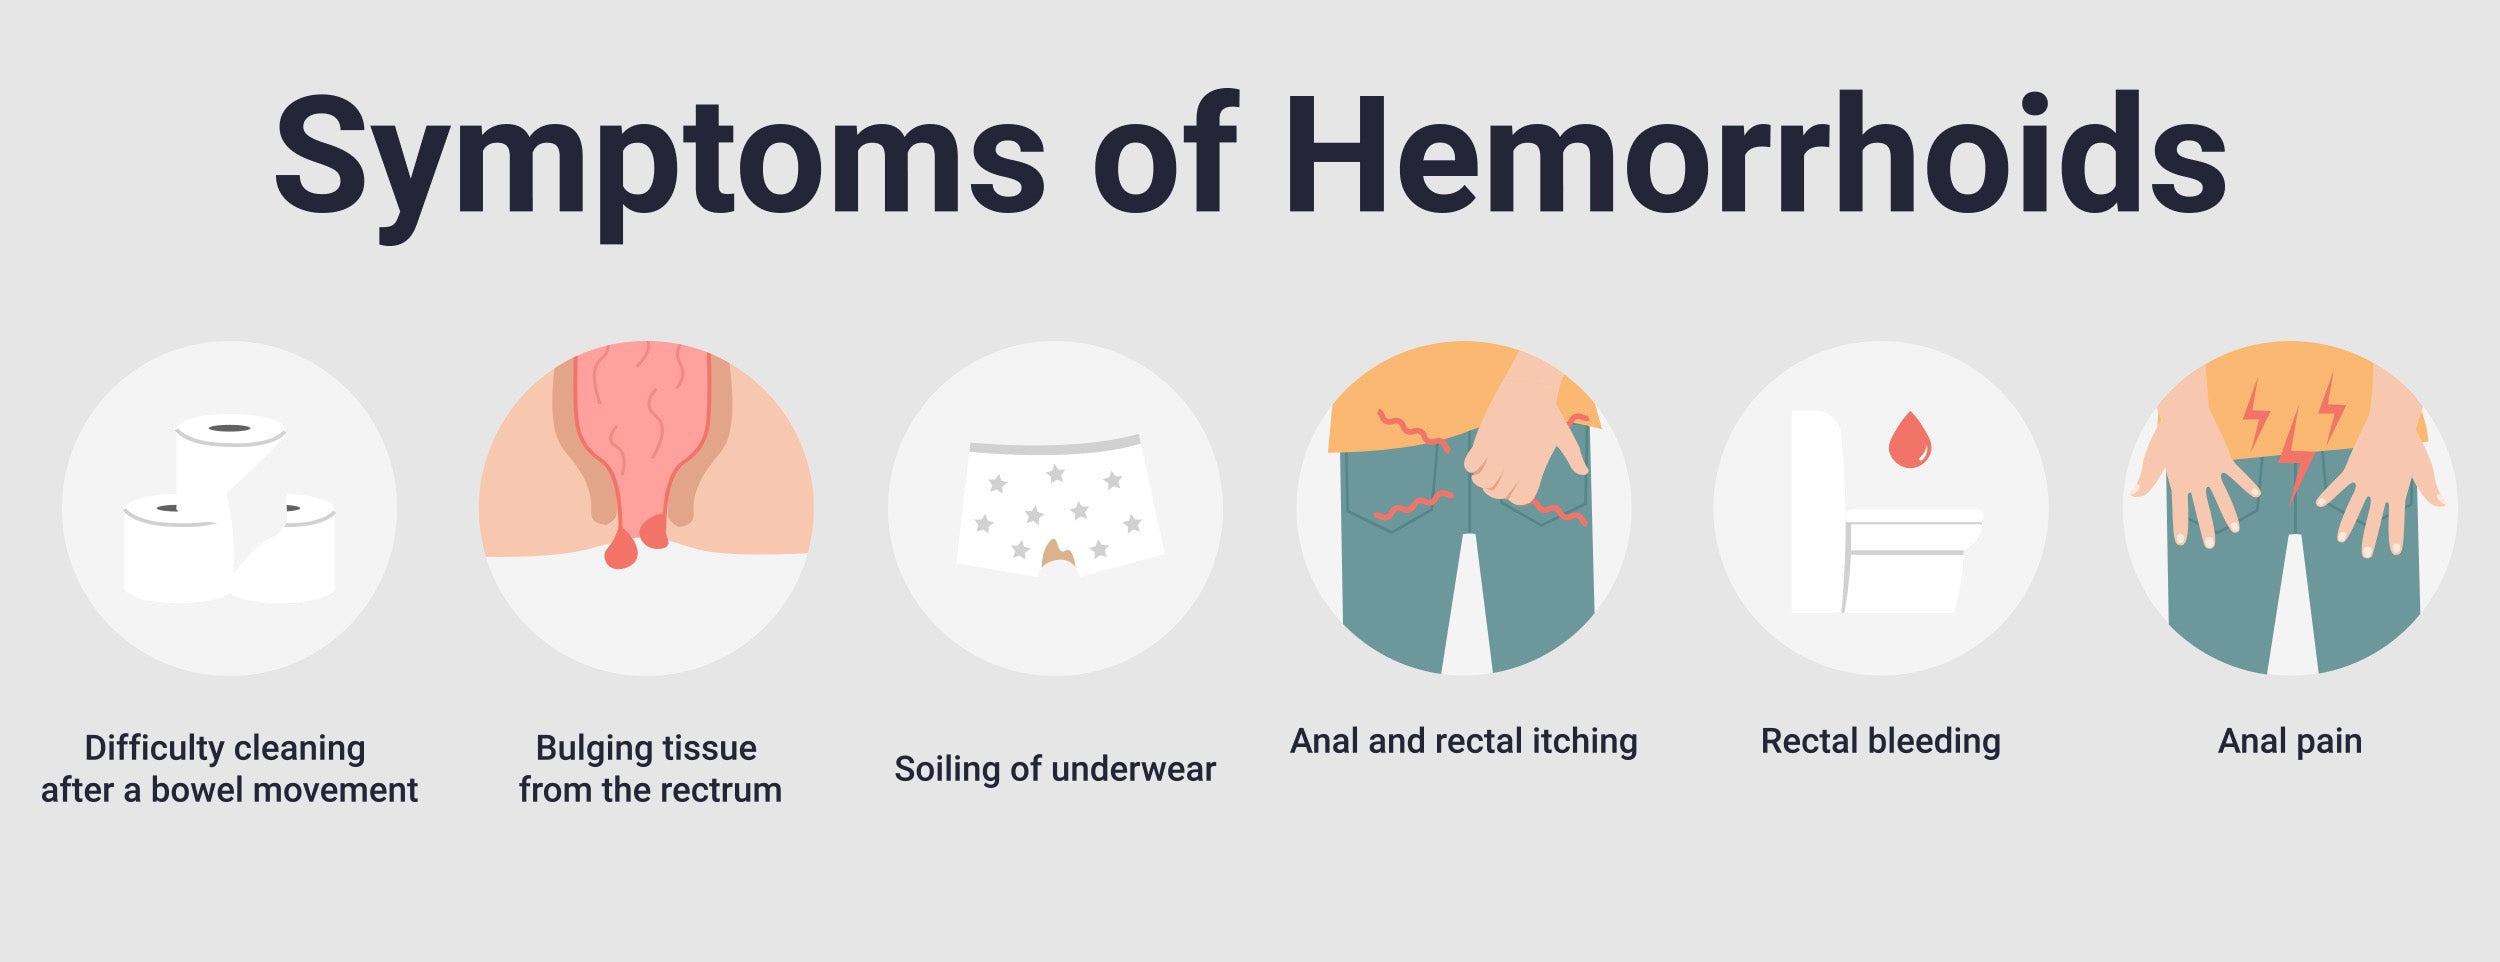 Signs and symptoms of hemorrhoids